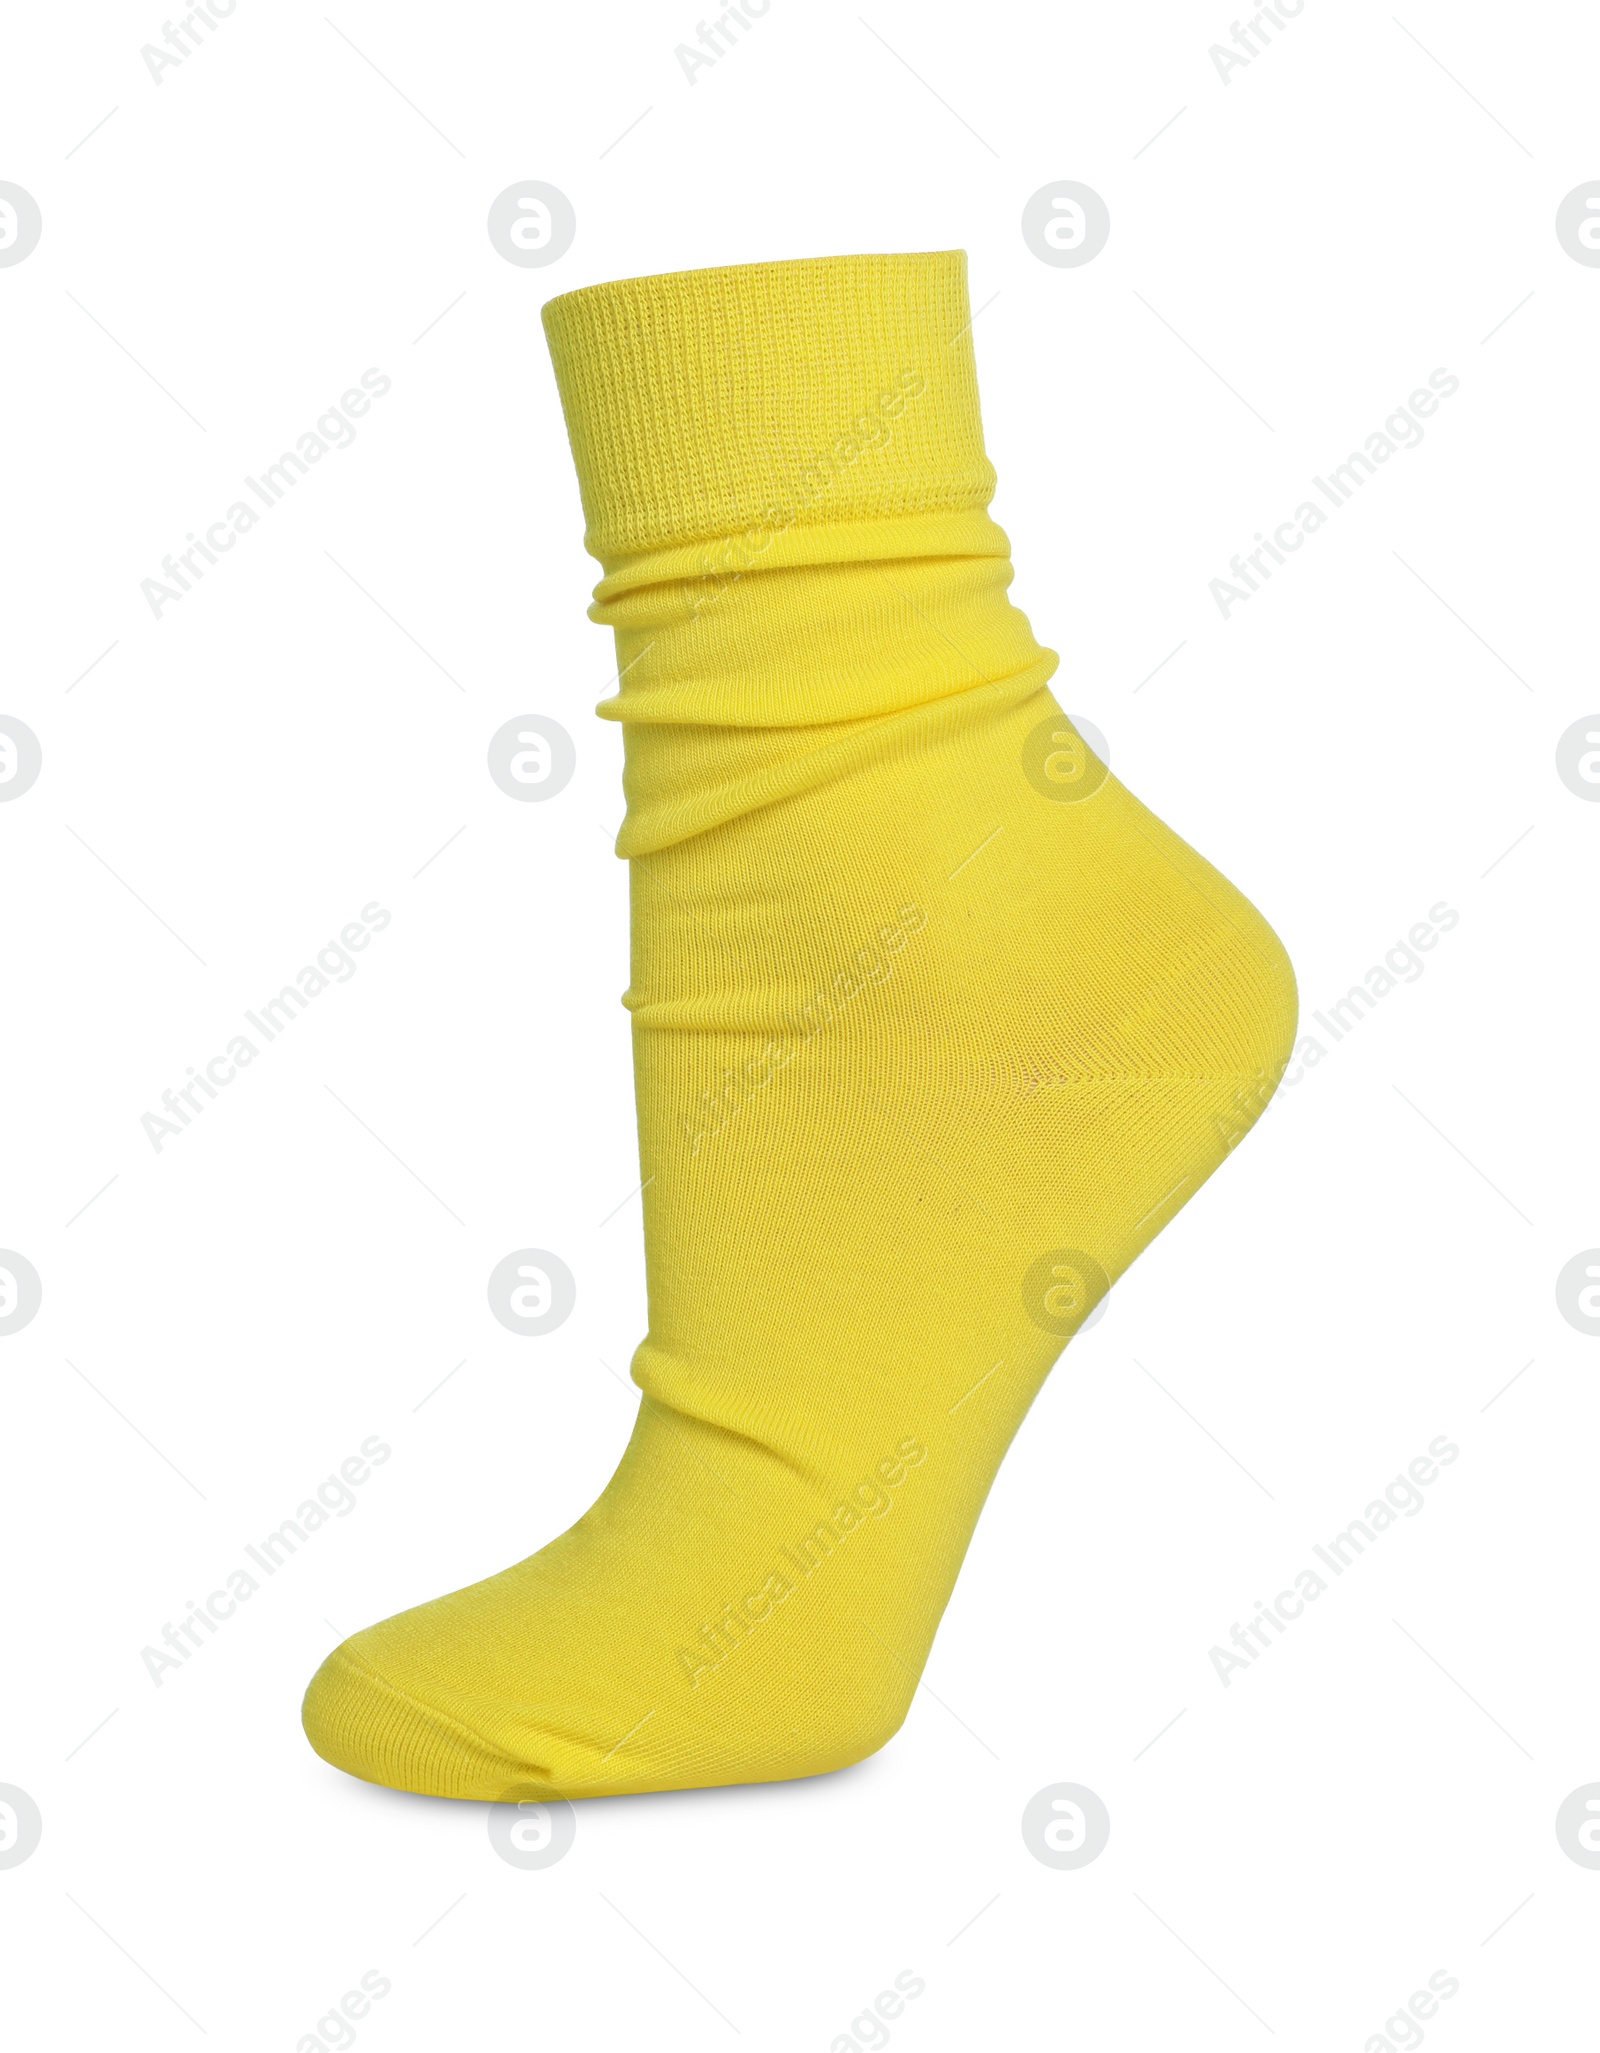 Photo of One bright yellow sock on white background